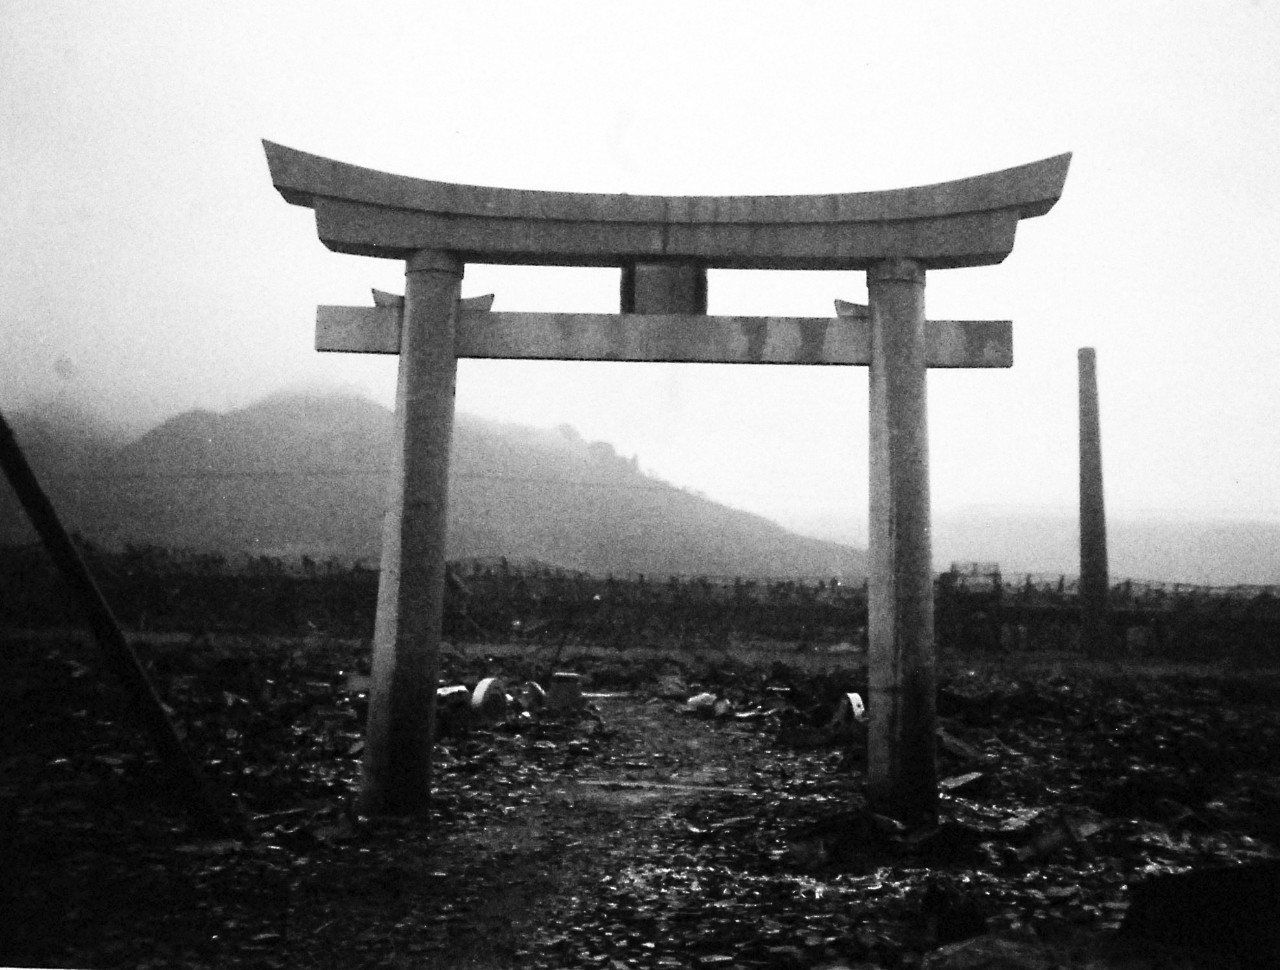 127-GW-1643-137430:     Nagasaki, Japan, 1945.   This shrine survived the force of the atomic bomb in Nagasaki but the sprawling ordnance plant in the background is a mass of twisted, buckled and scorched girders and framework.          Photographed at Nagasaki by September 16, 1945.        Official U.S. Marine Corps Photograph, now in the collections of the National Archives.  (2016/10/25).